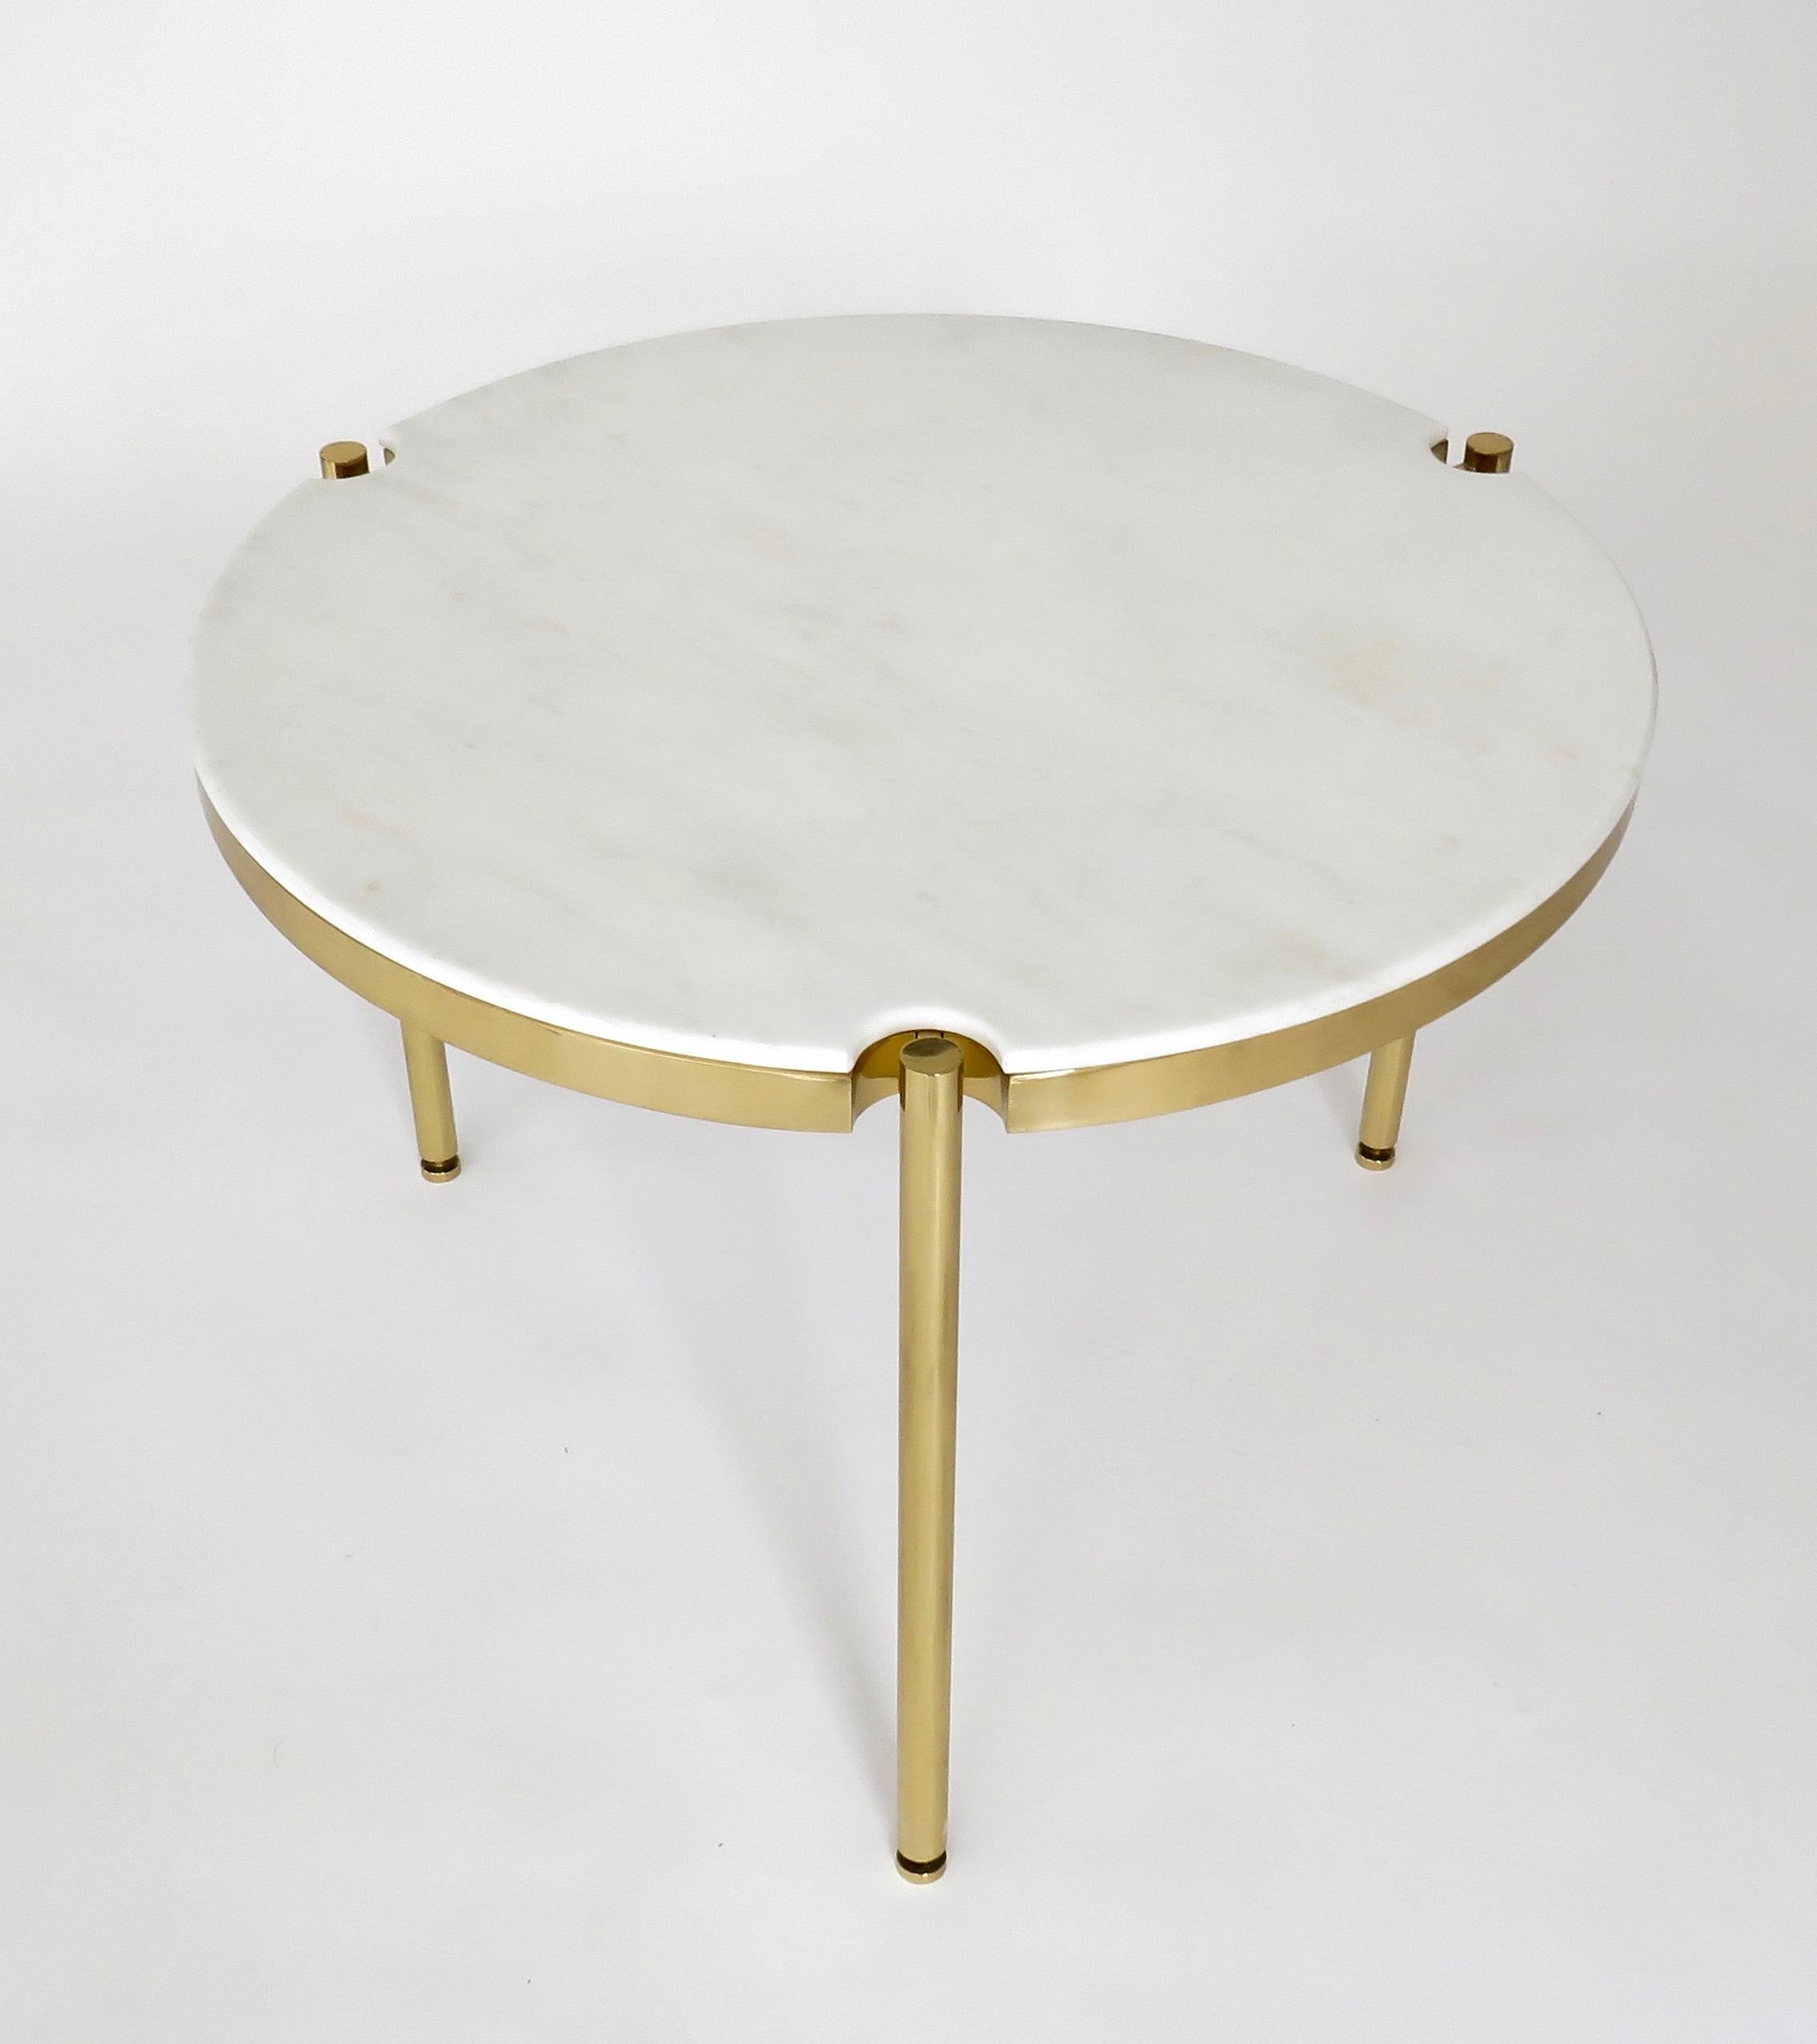 Osvaldo Bersani Italian side table, small coffee table or occasional table of polished brass and pale Carrara marble with subtle veining for Tecno,
circa 1960.
Perfect condition with no chips to the marble and the brass a nice polish.
Overall